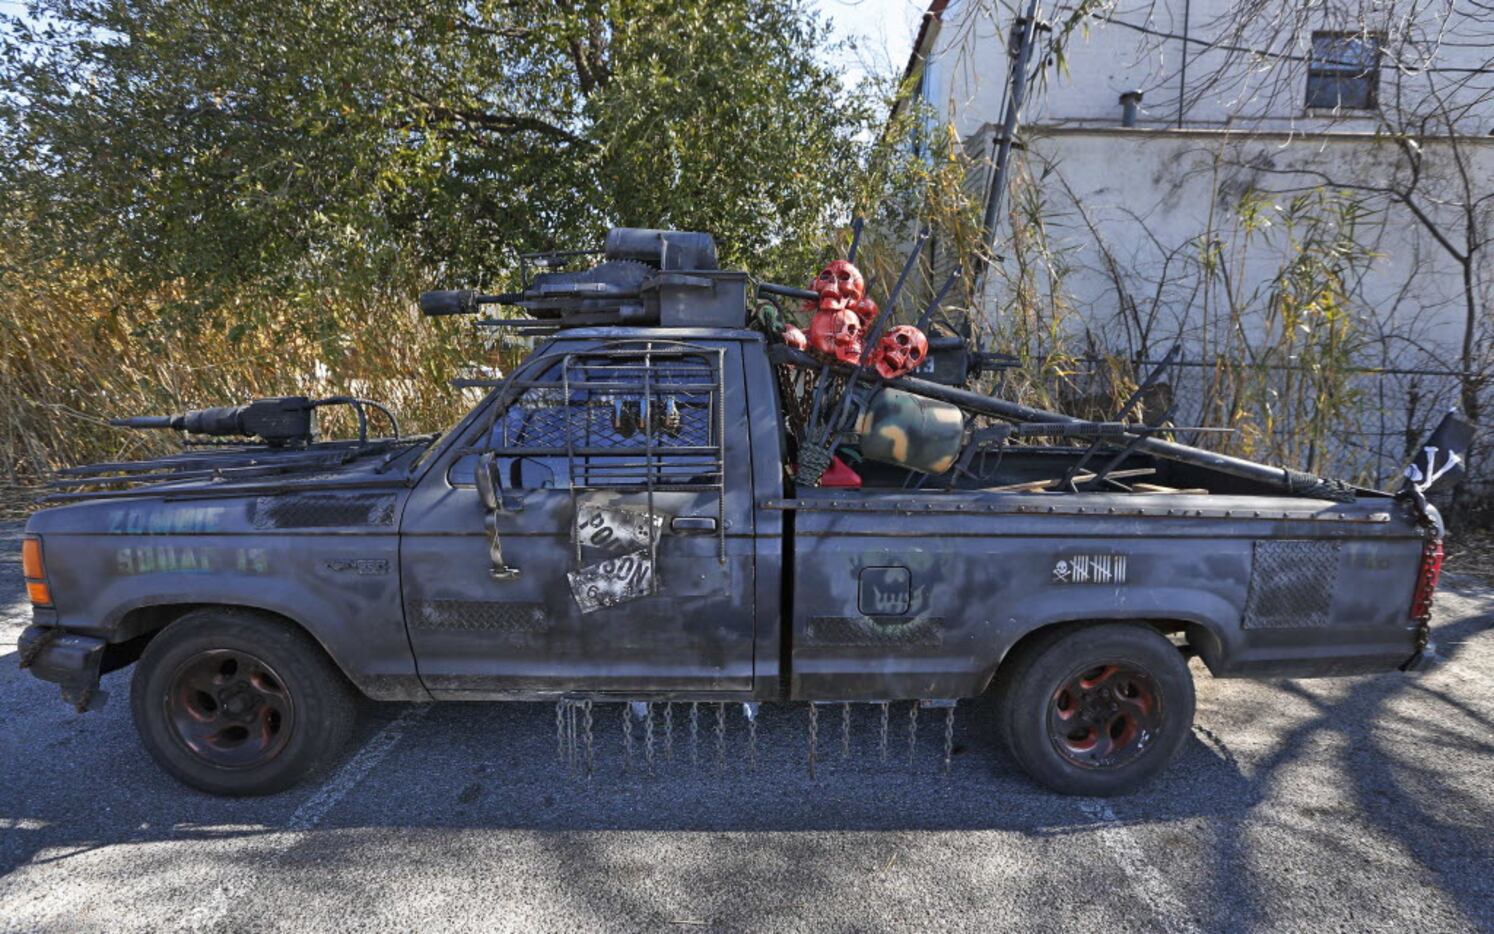 Ace Cordell's truck, which he has transformed into a zombie killing machine, photographed in...